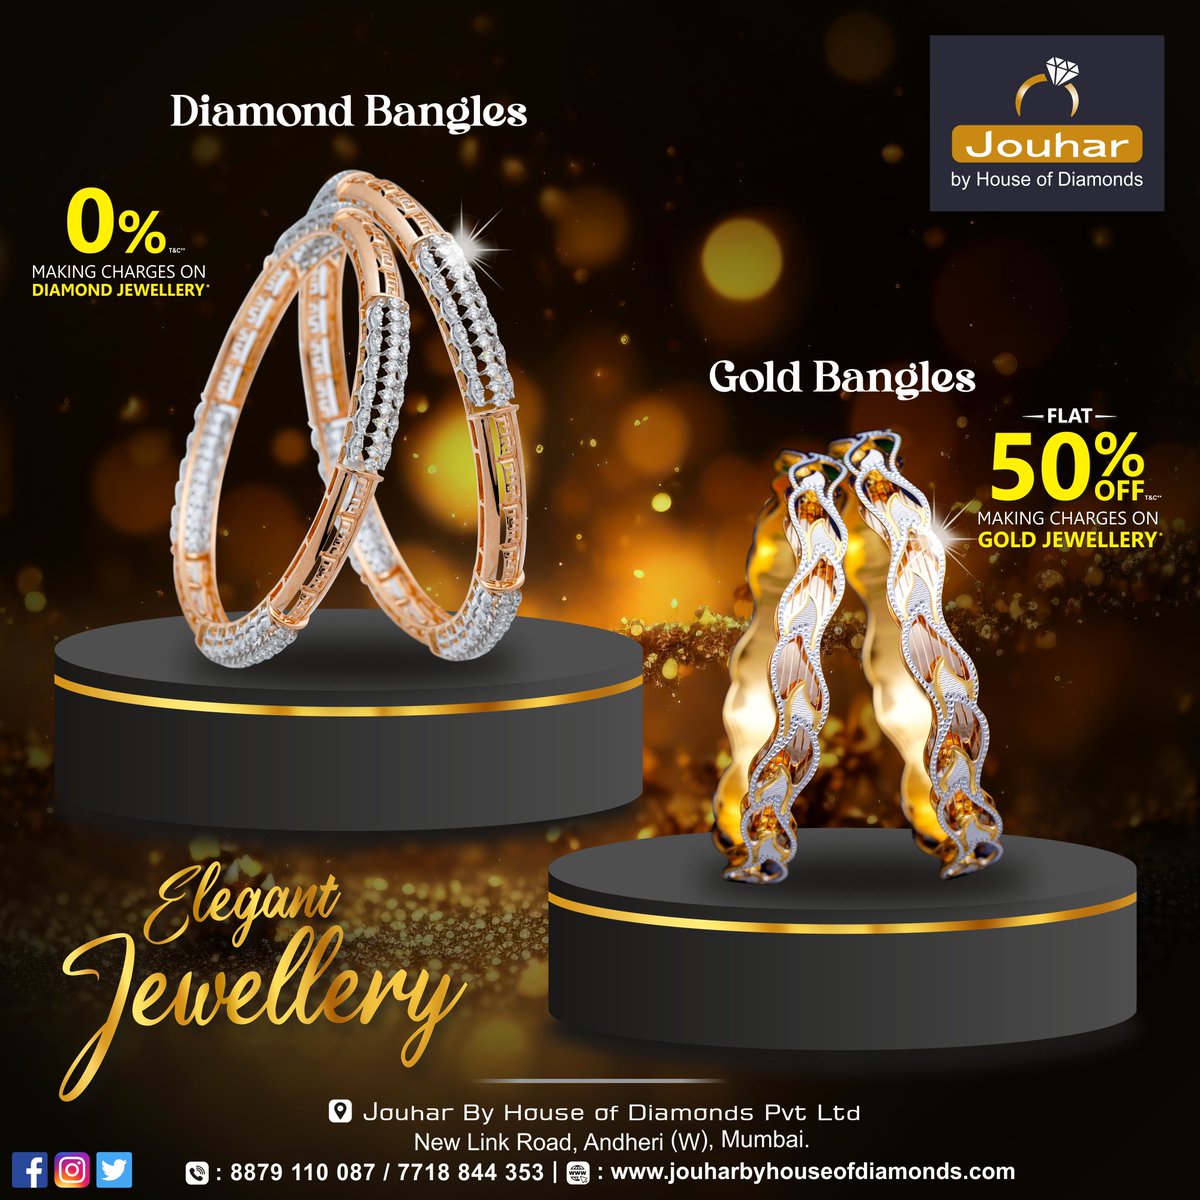 Diamonds may be a girl's best friend, but gold is her soulmate.
 
#gold #diamonds #bangles #jewelry #goldjewelry #diamondjewelry #jewelrydesign #fashionjewelry #jewelrylover #jewelryaddict #goldaddict #diamondaddict #jewelrygram #goldgram #diamondgram #accessories #stylegram